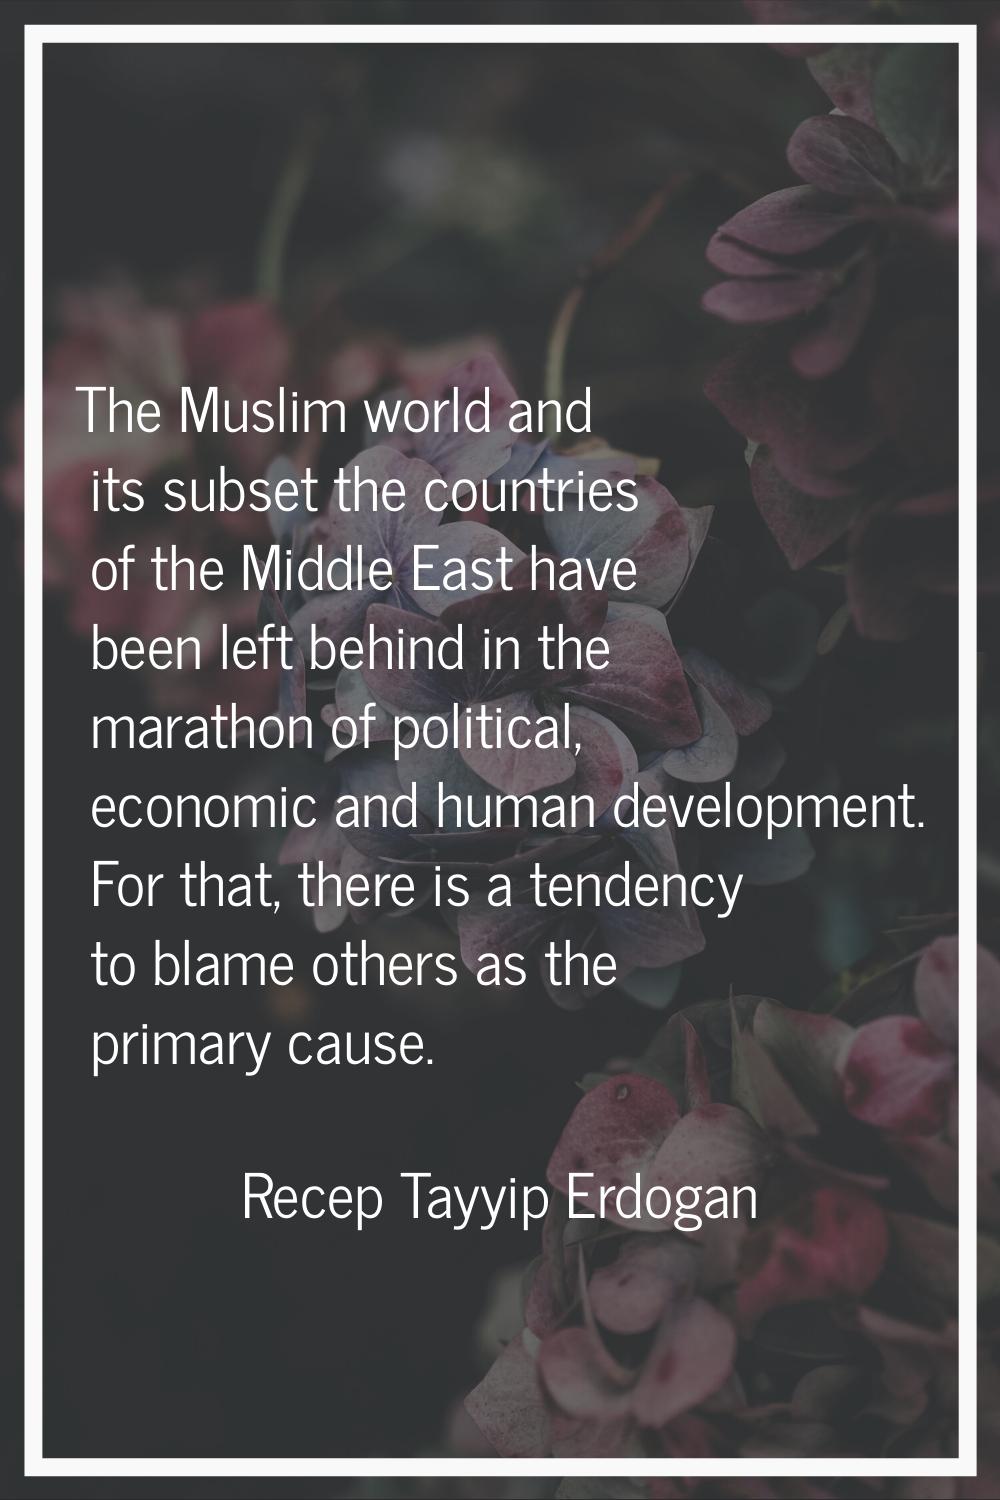 The Muslim world and its subset the countries of the Middle East have been left behind in the marat